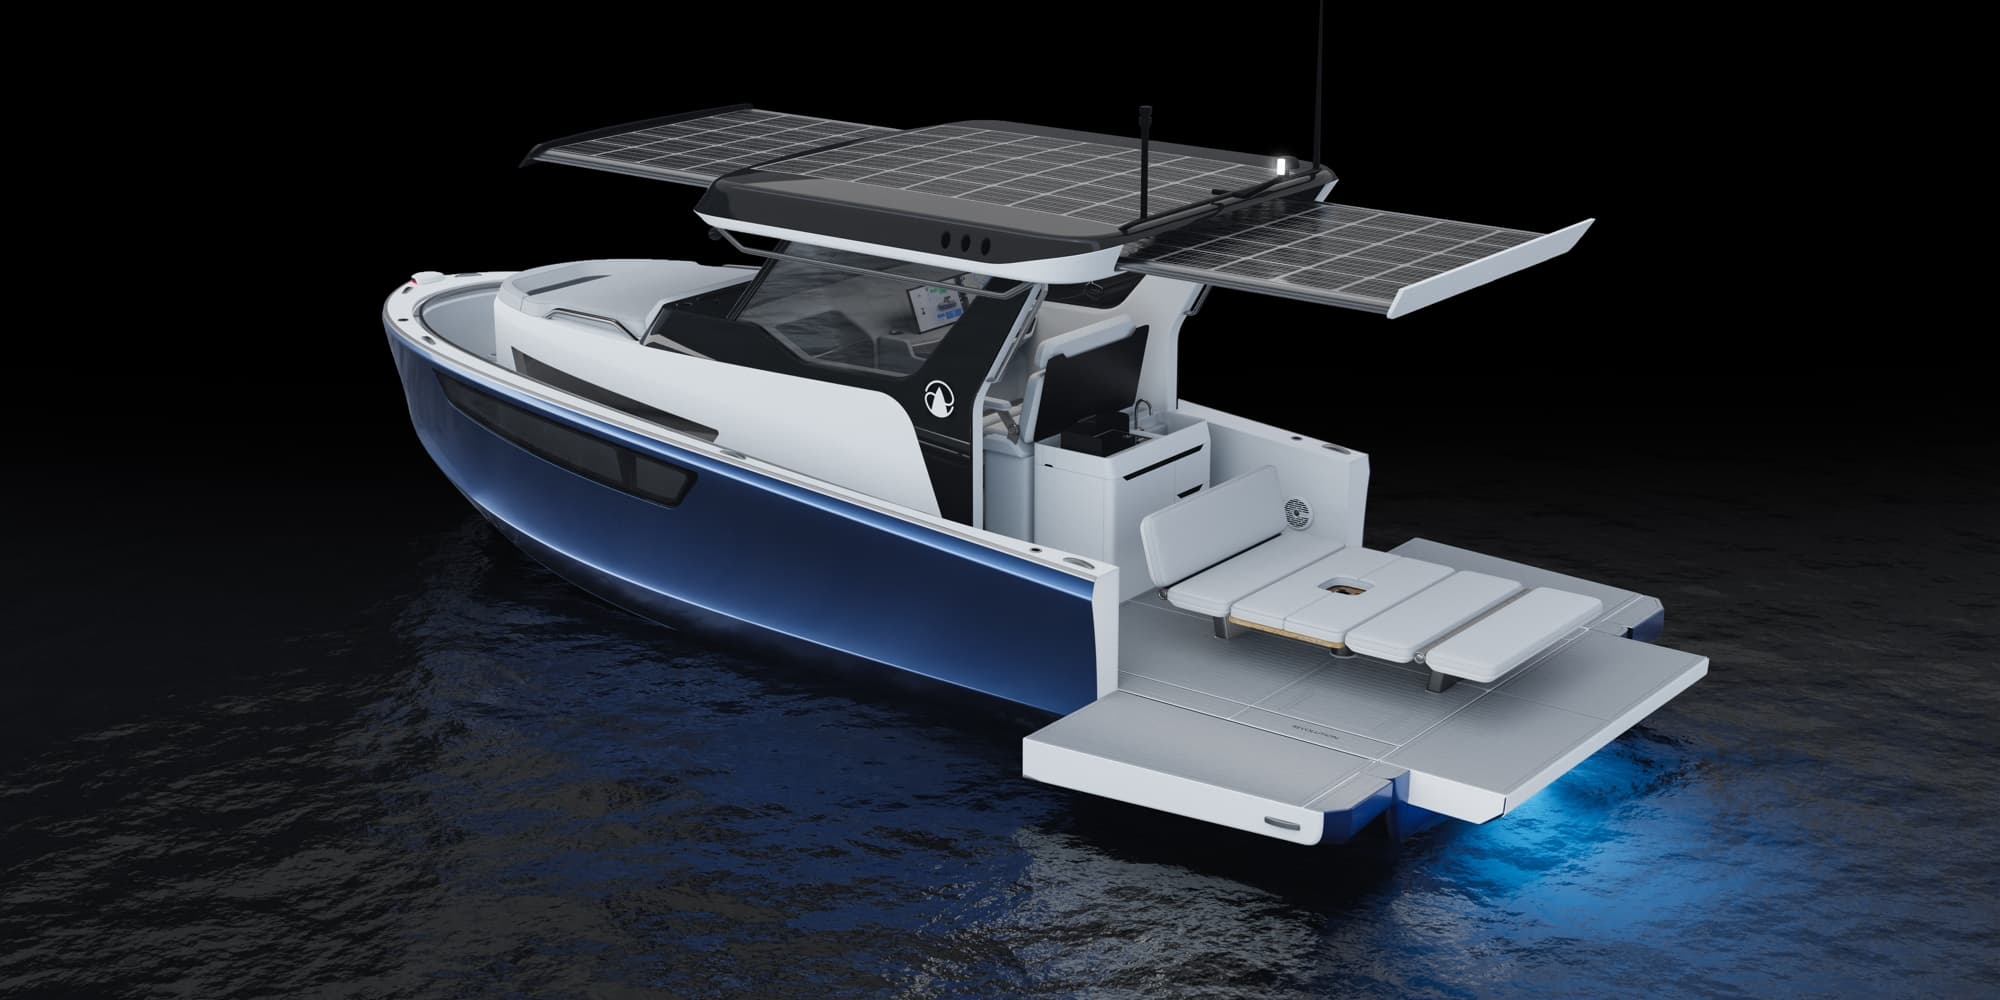 New Florida-built 800HP electric speed boat includes solar charging